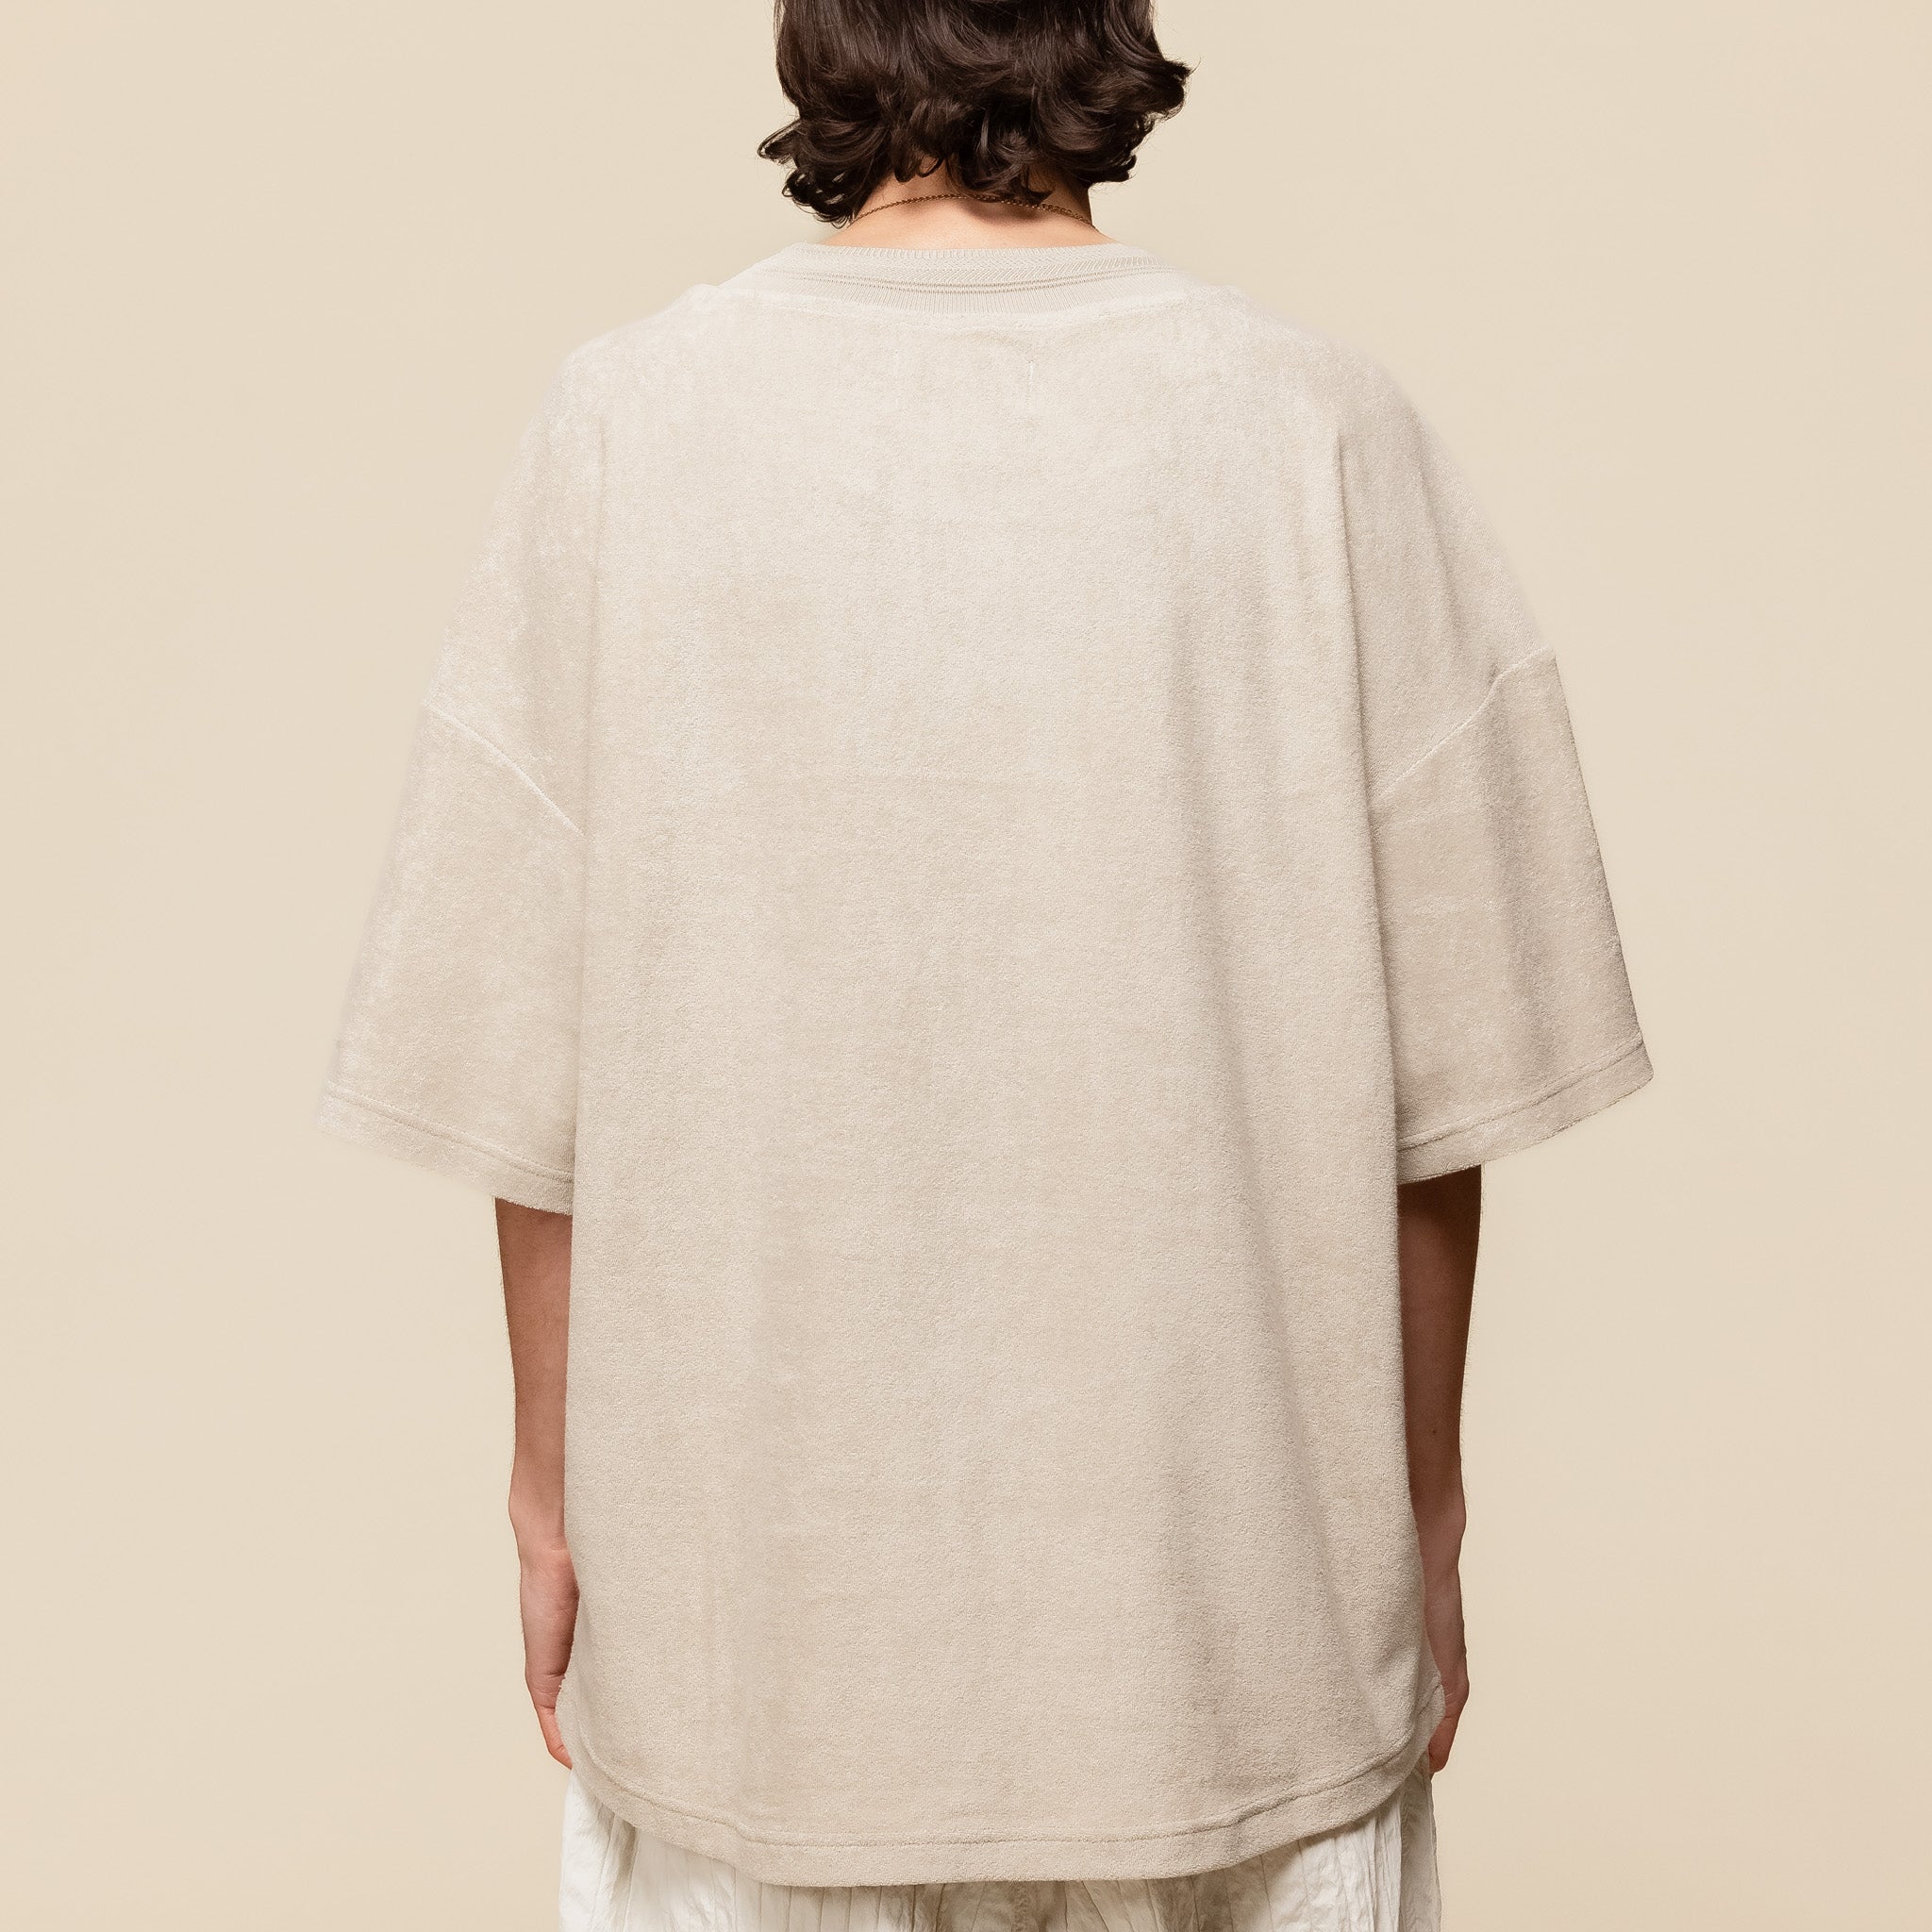 Merely Made - Hmong Den Wide Roundneck T-shirt - Sand Beige 24SML242TS "merely made website" "merely made stockist"